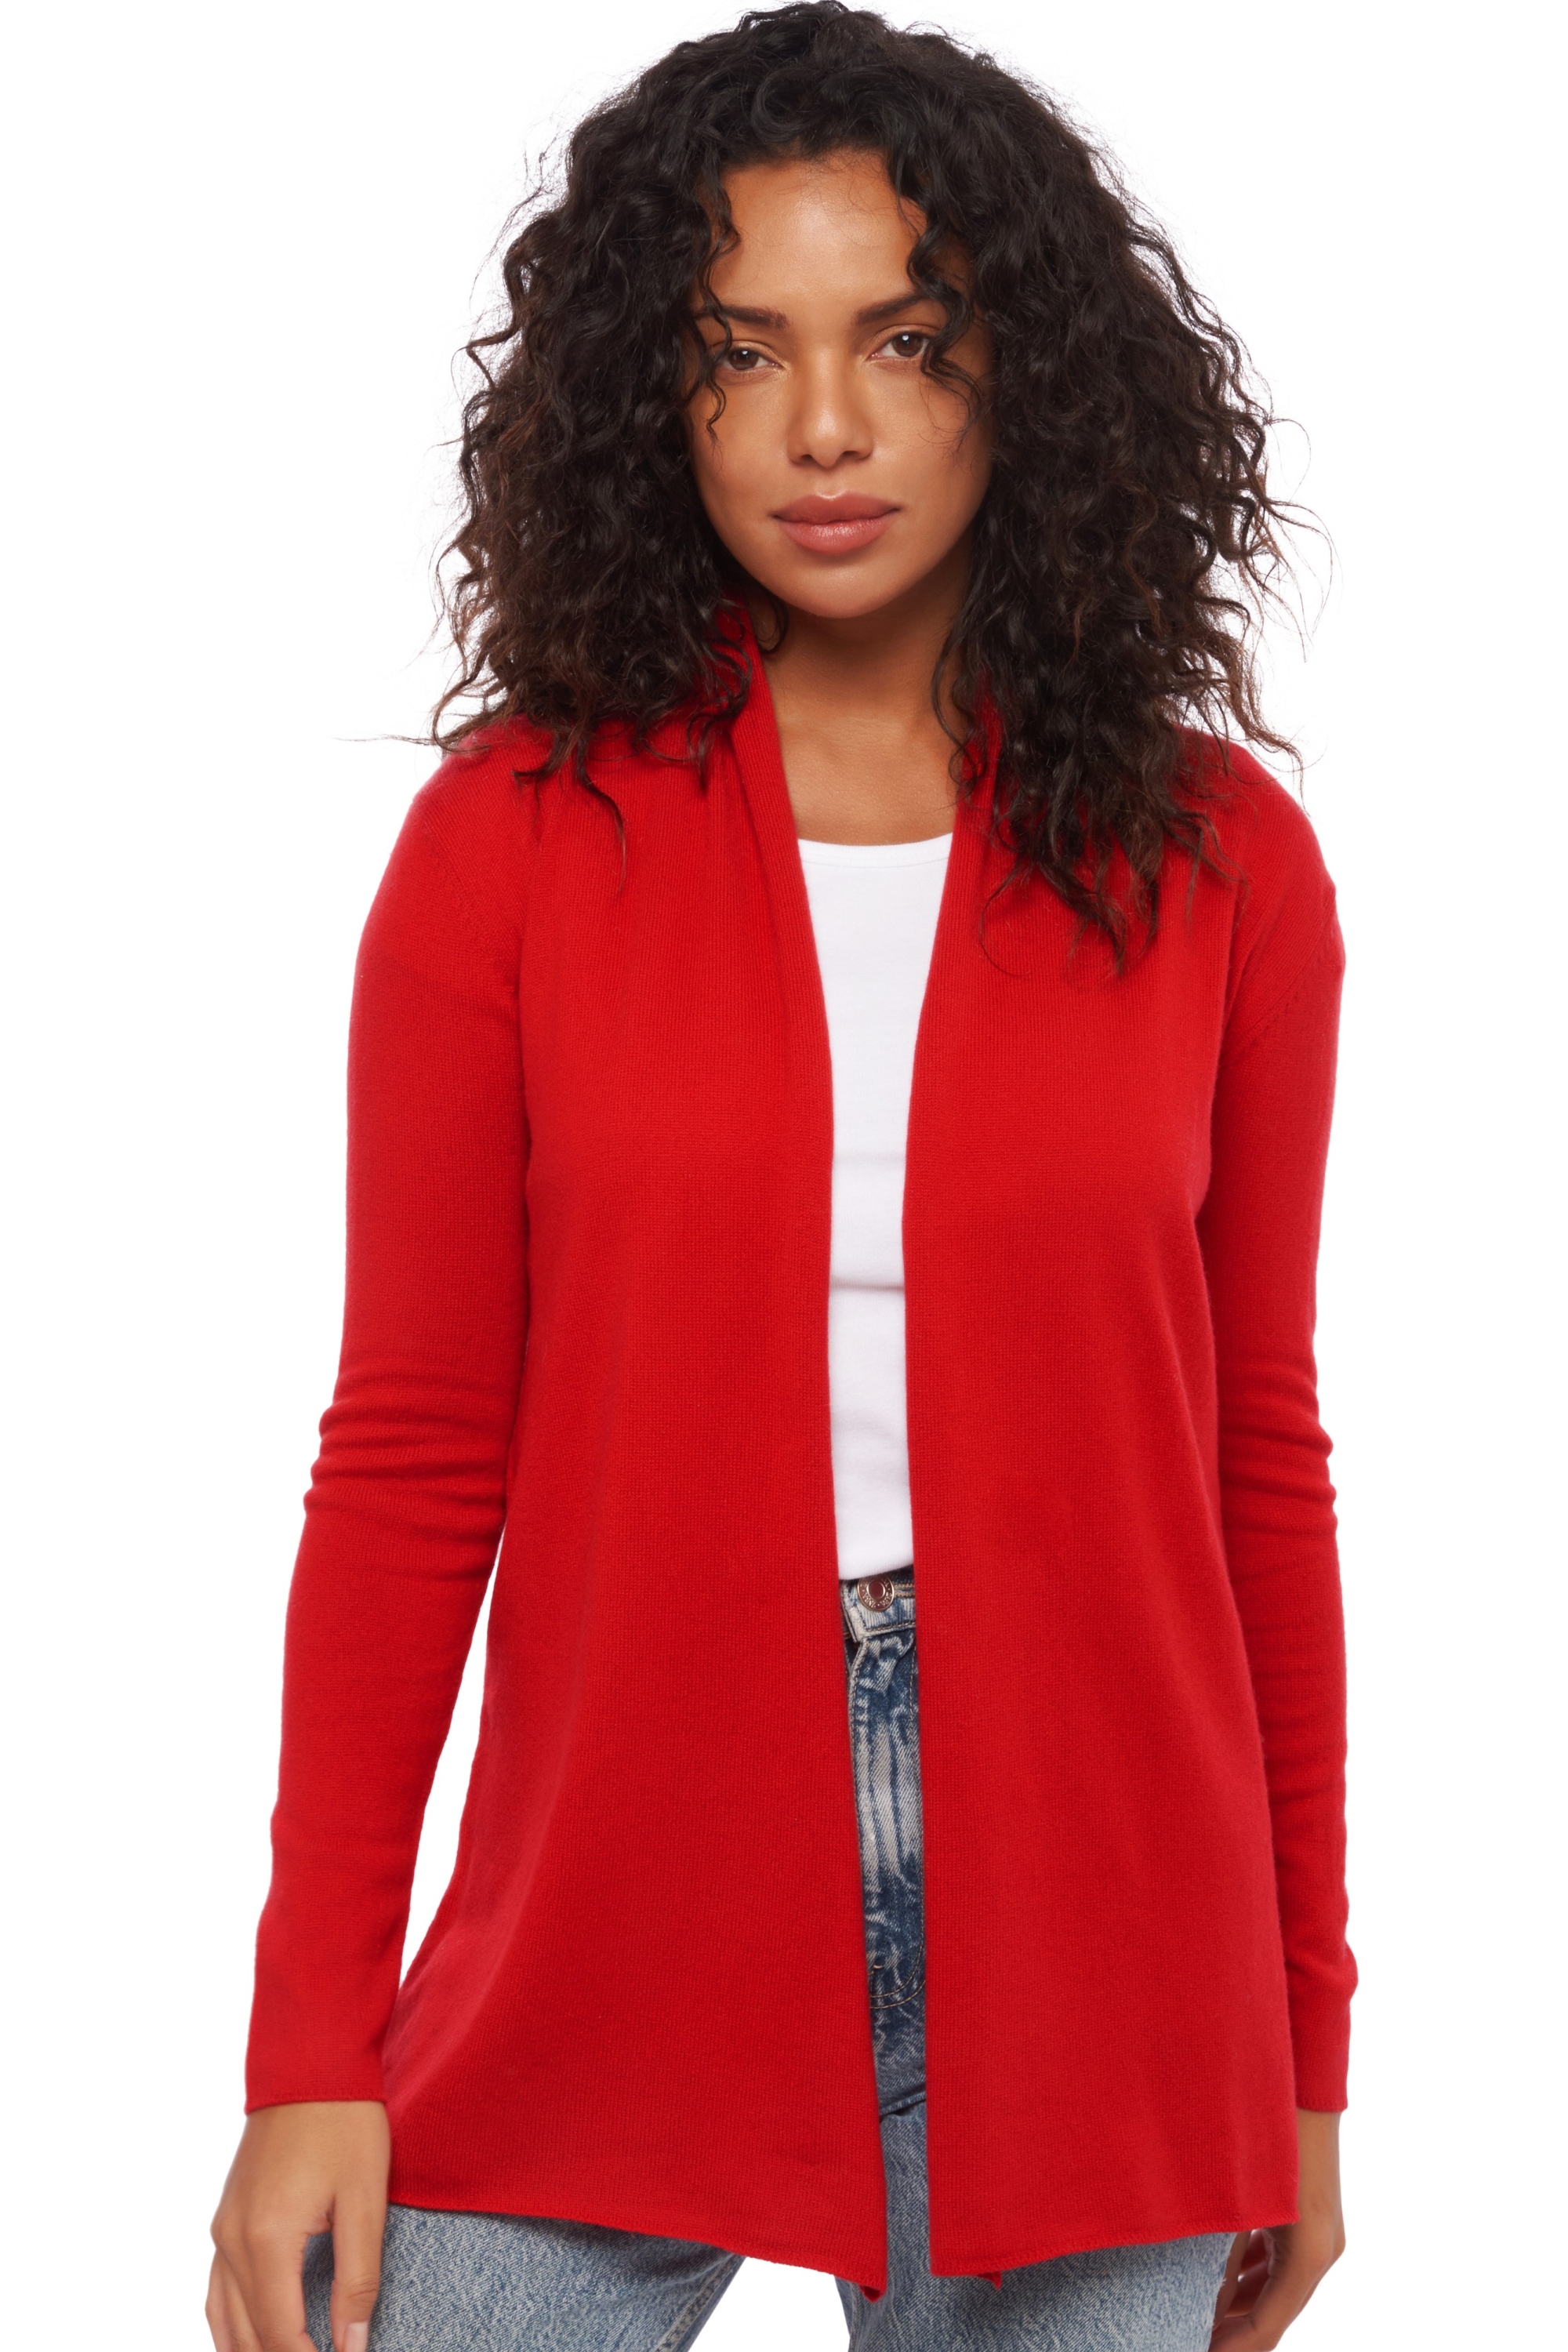 Cachemire pull femme pucci rouge velours 4xl